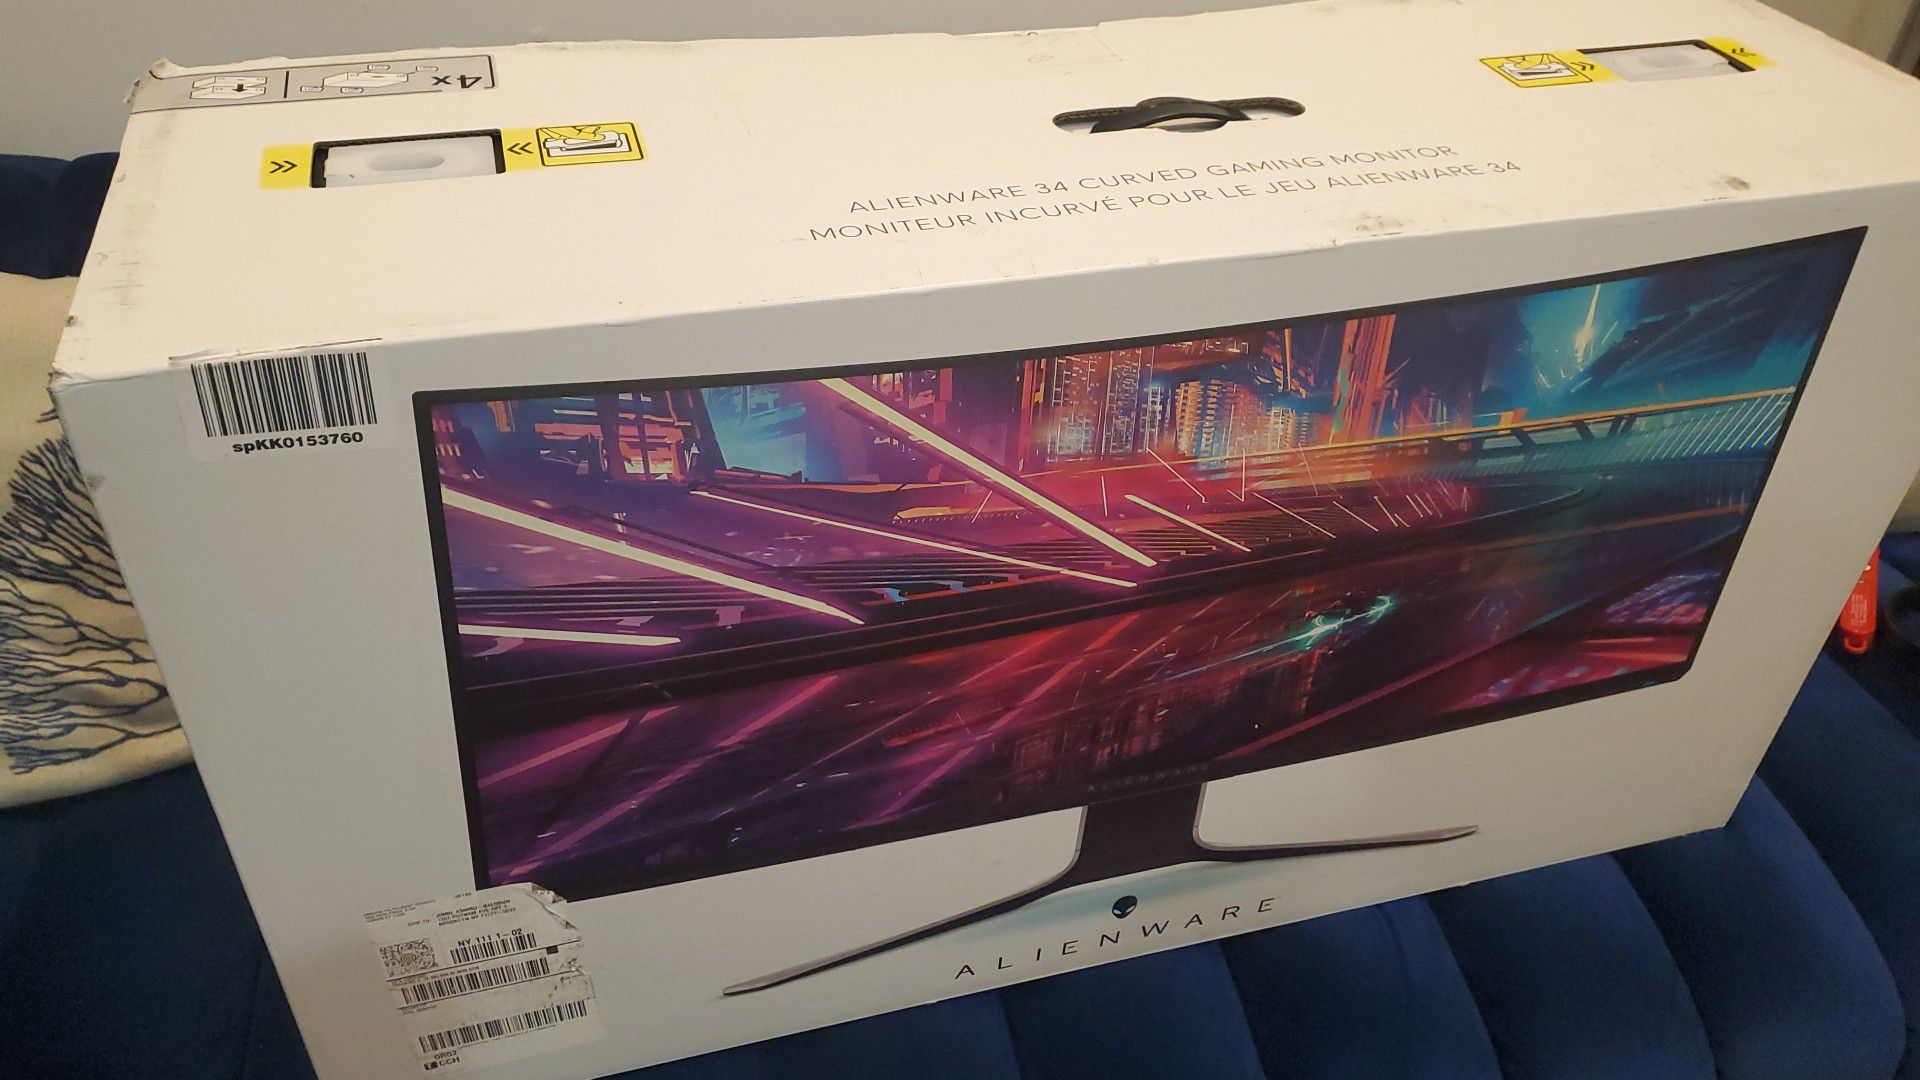 Brand new Alienware 34 inch curved gaming monitor